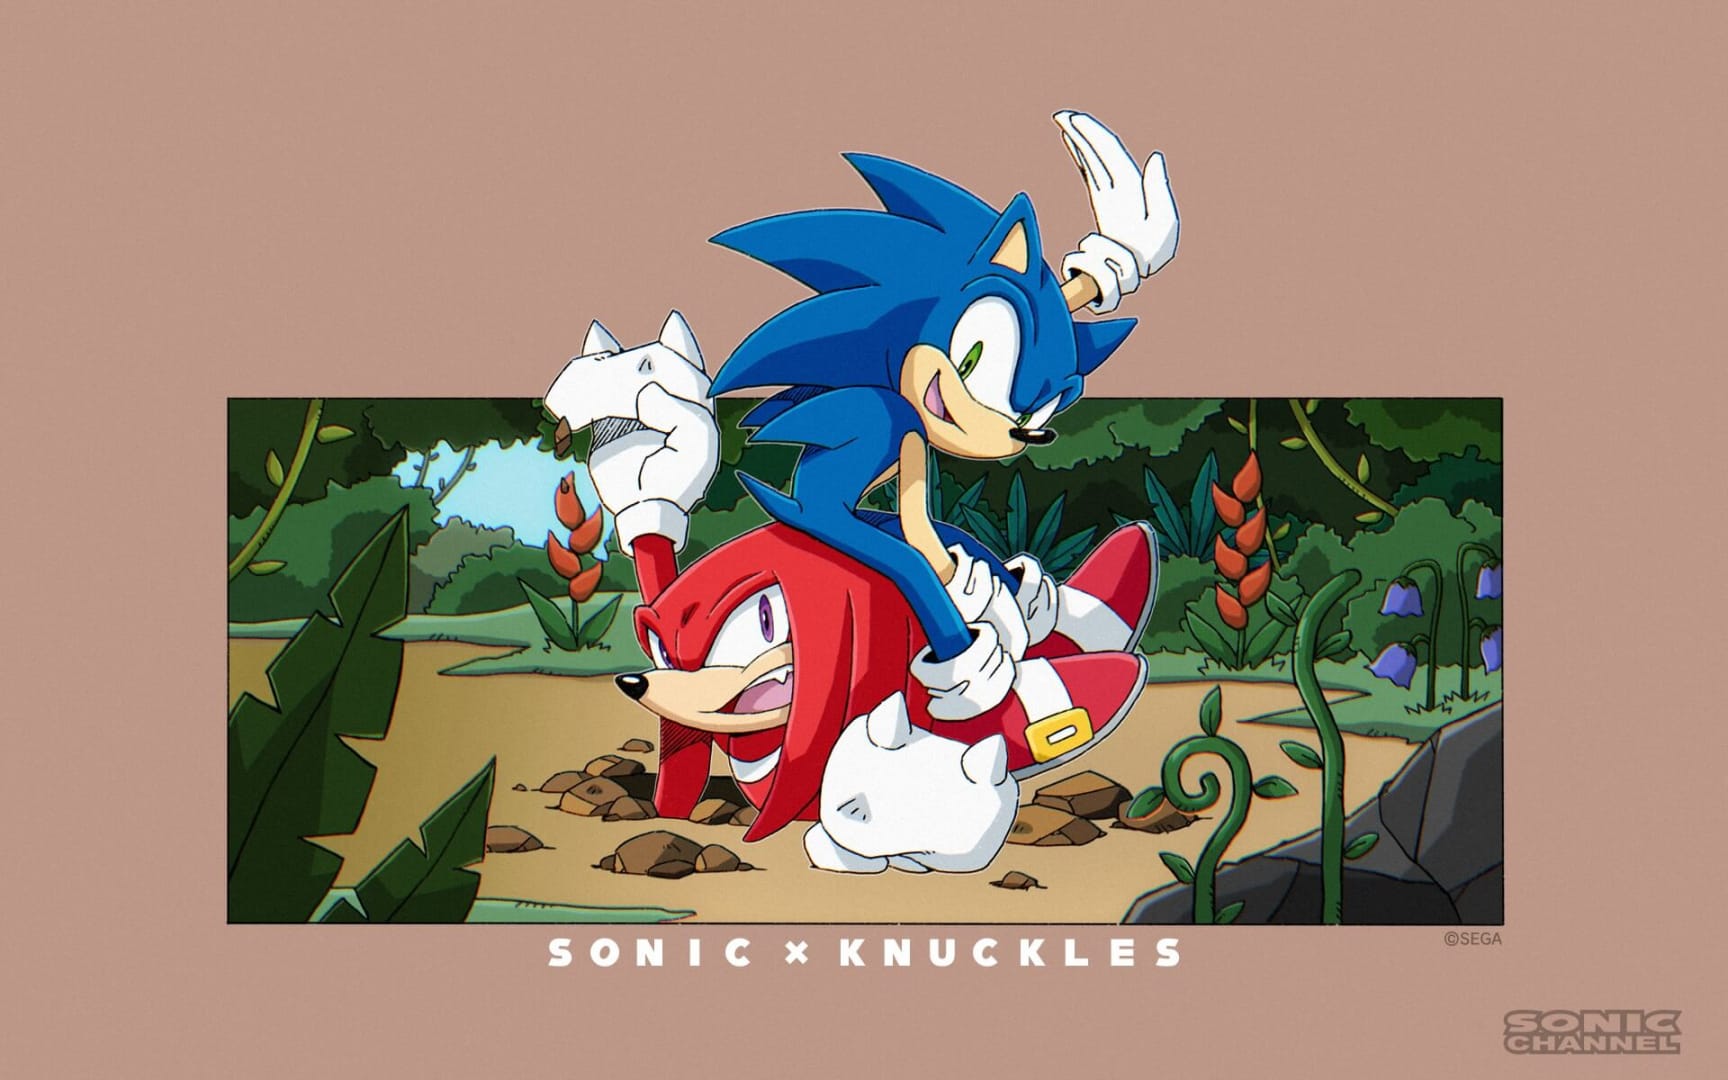 Knuckles ir Sonic tapetai Sonic Channel